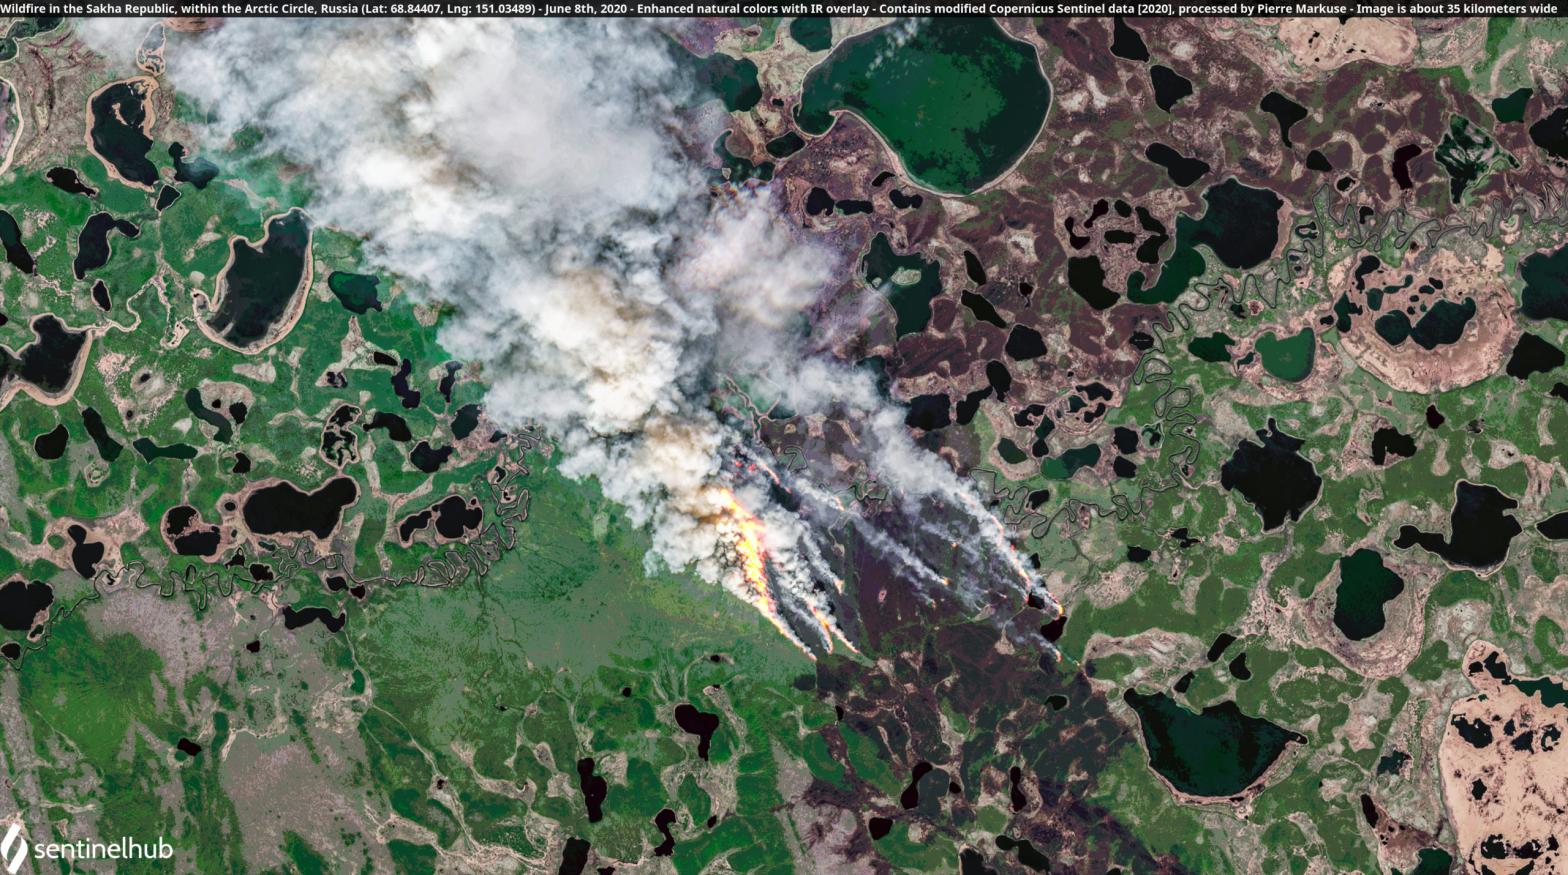 Wildfire in the Sakha Republic, within the Arctic Circle, Russia on June 8, 2020. (Image: Pierre, Flickr)